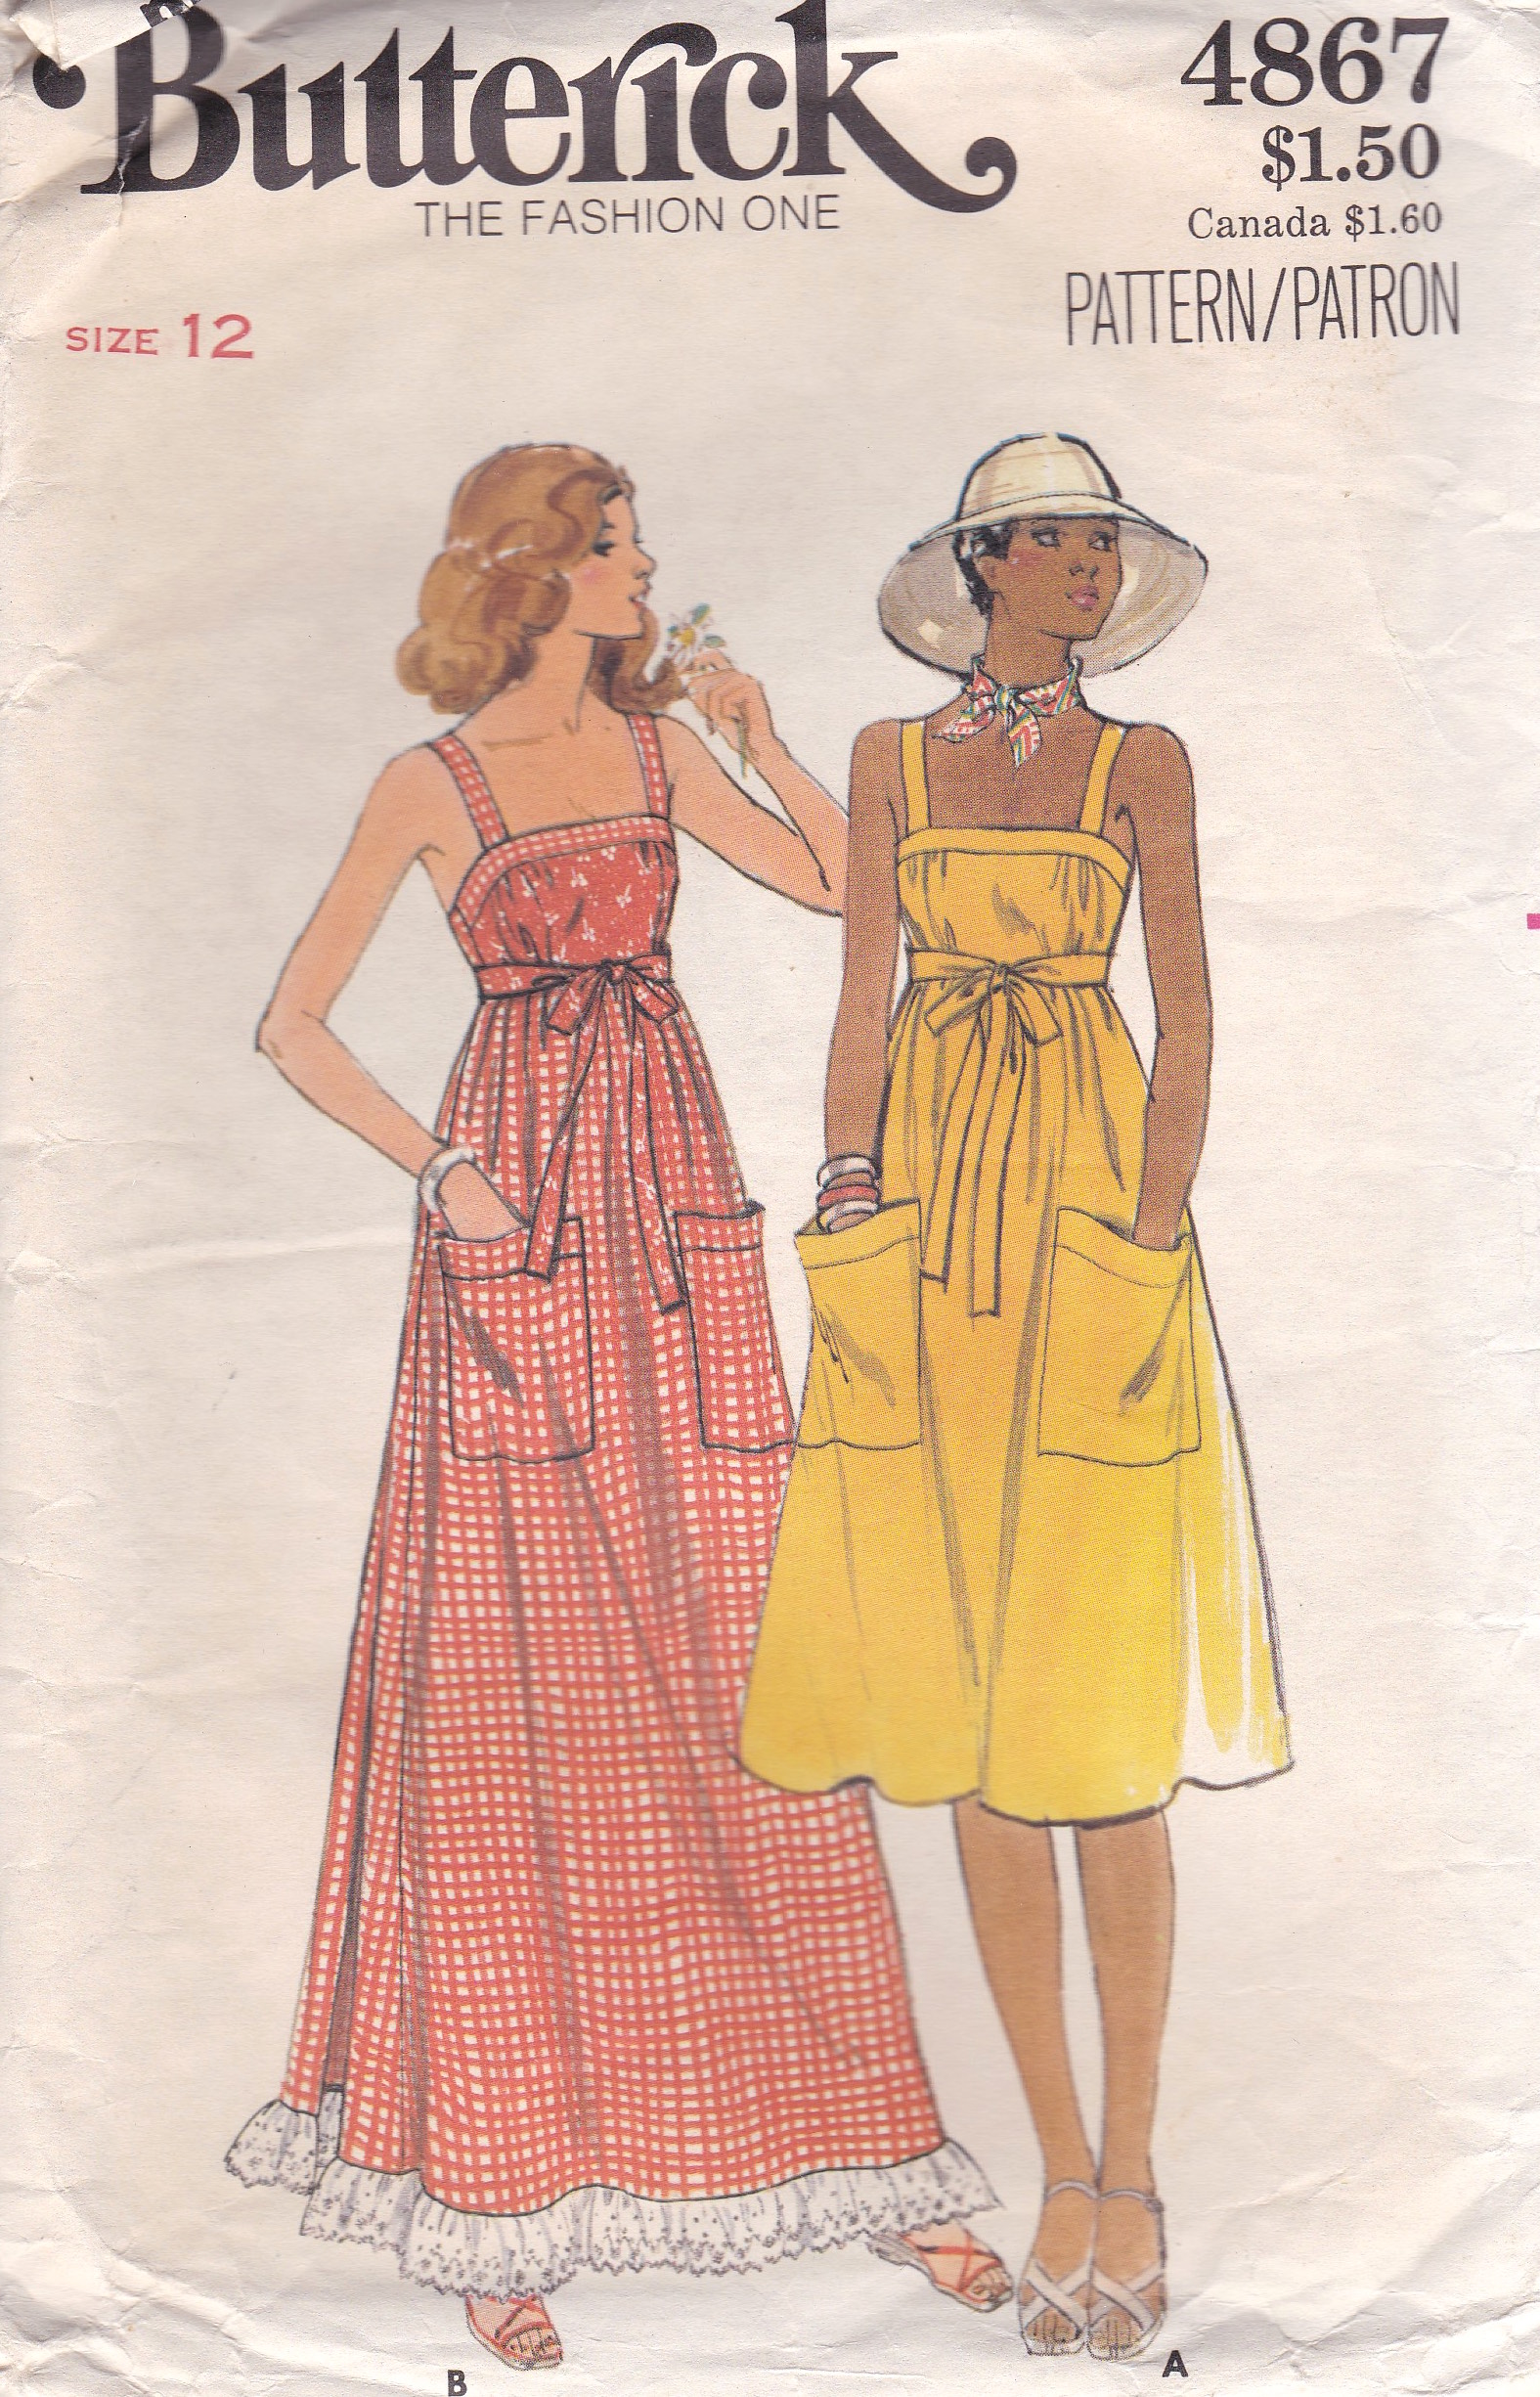 Butterick 4867 - Vintage Sewing Patterns